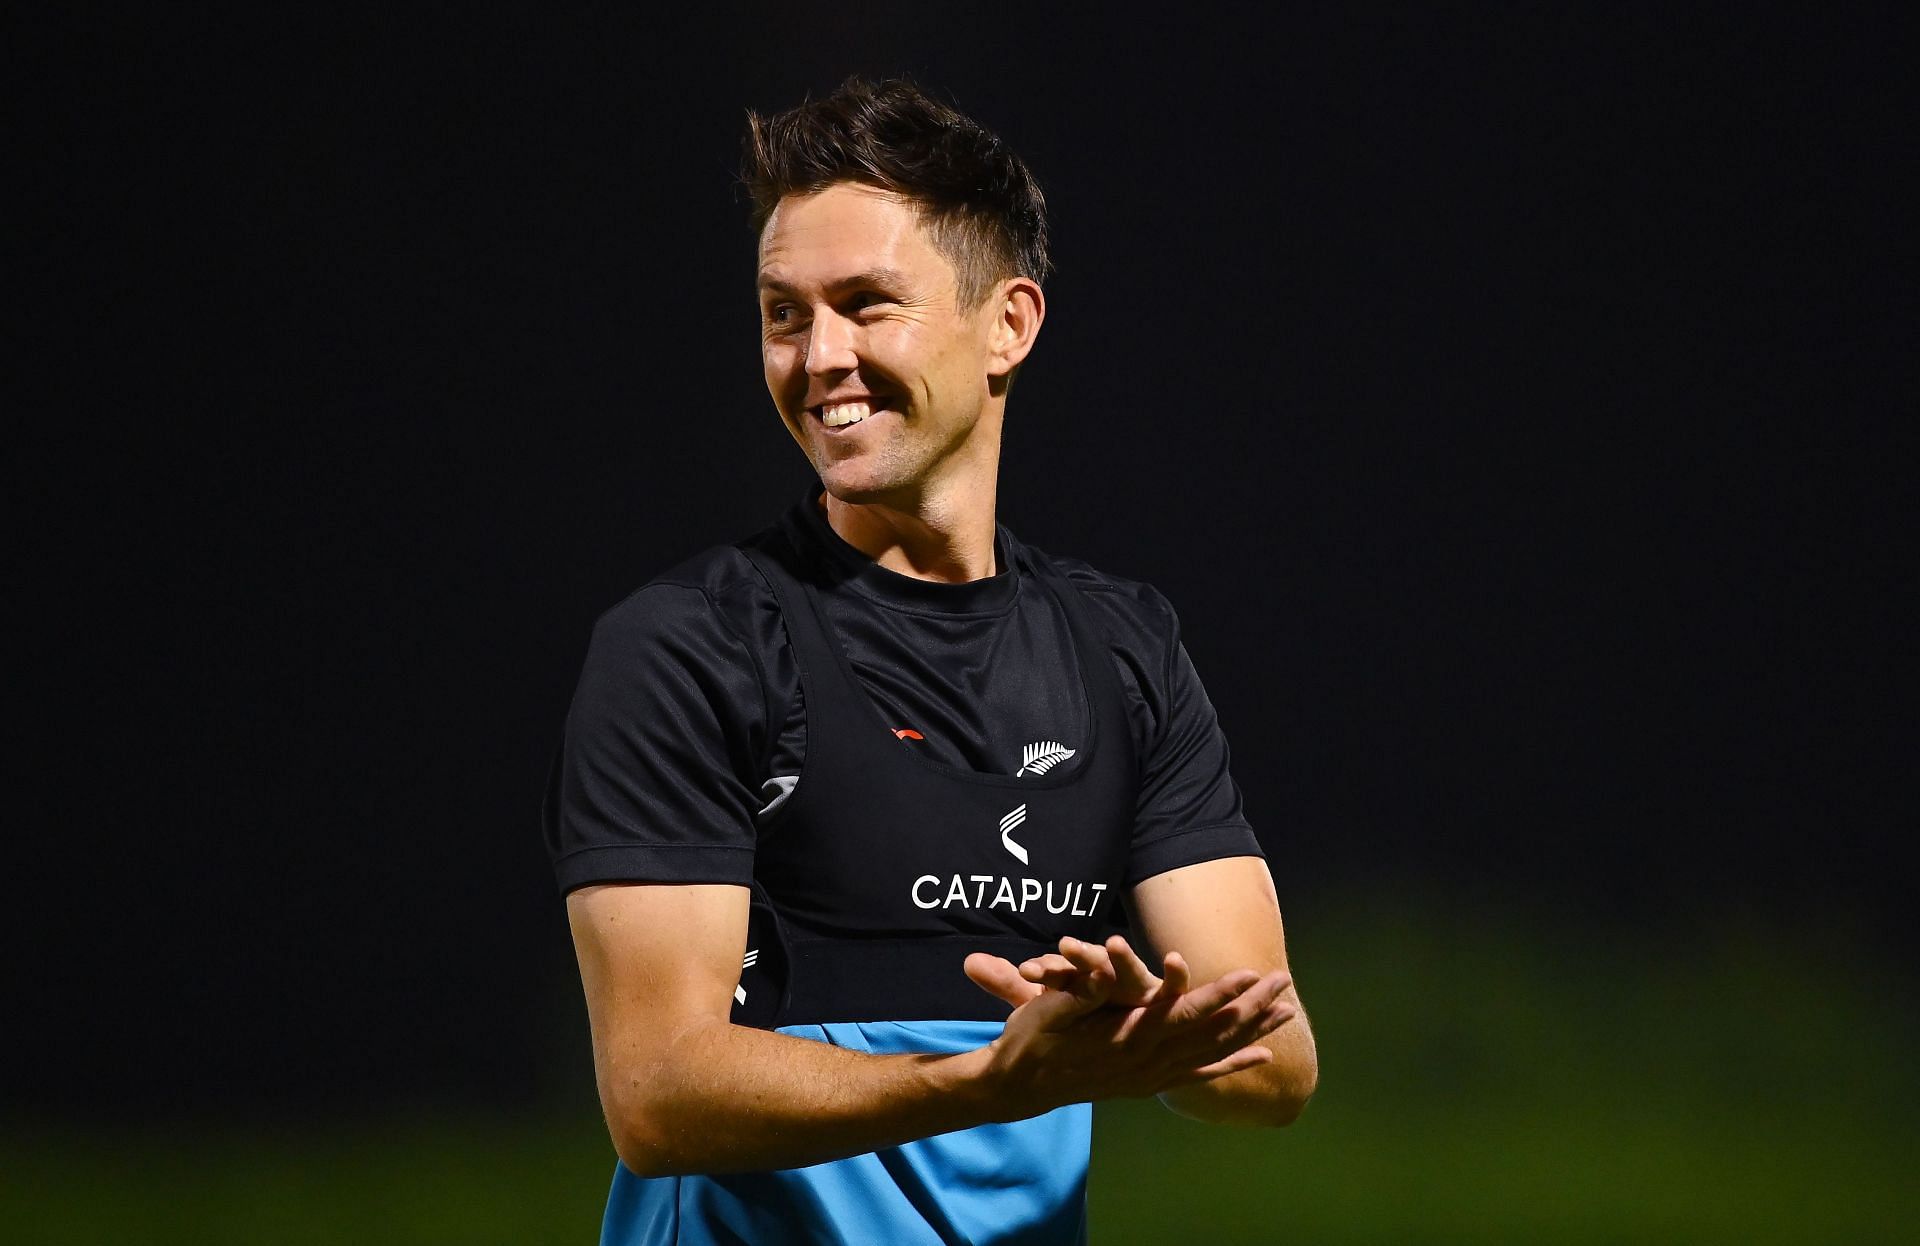 Trent Boult represents Northern Brave in the Super Smash